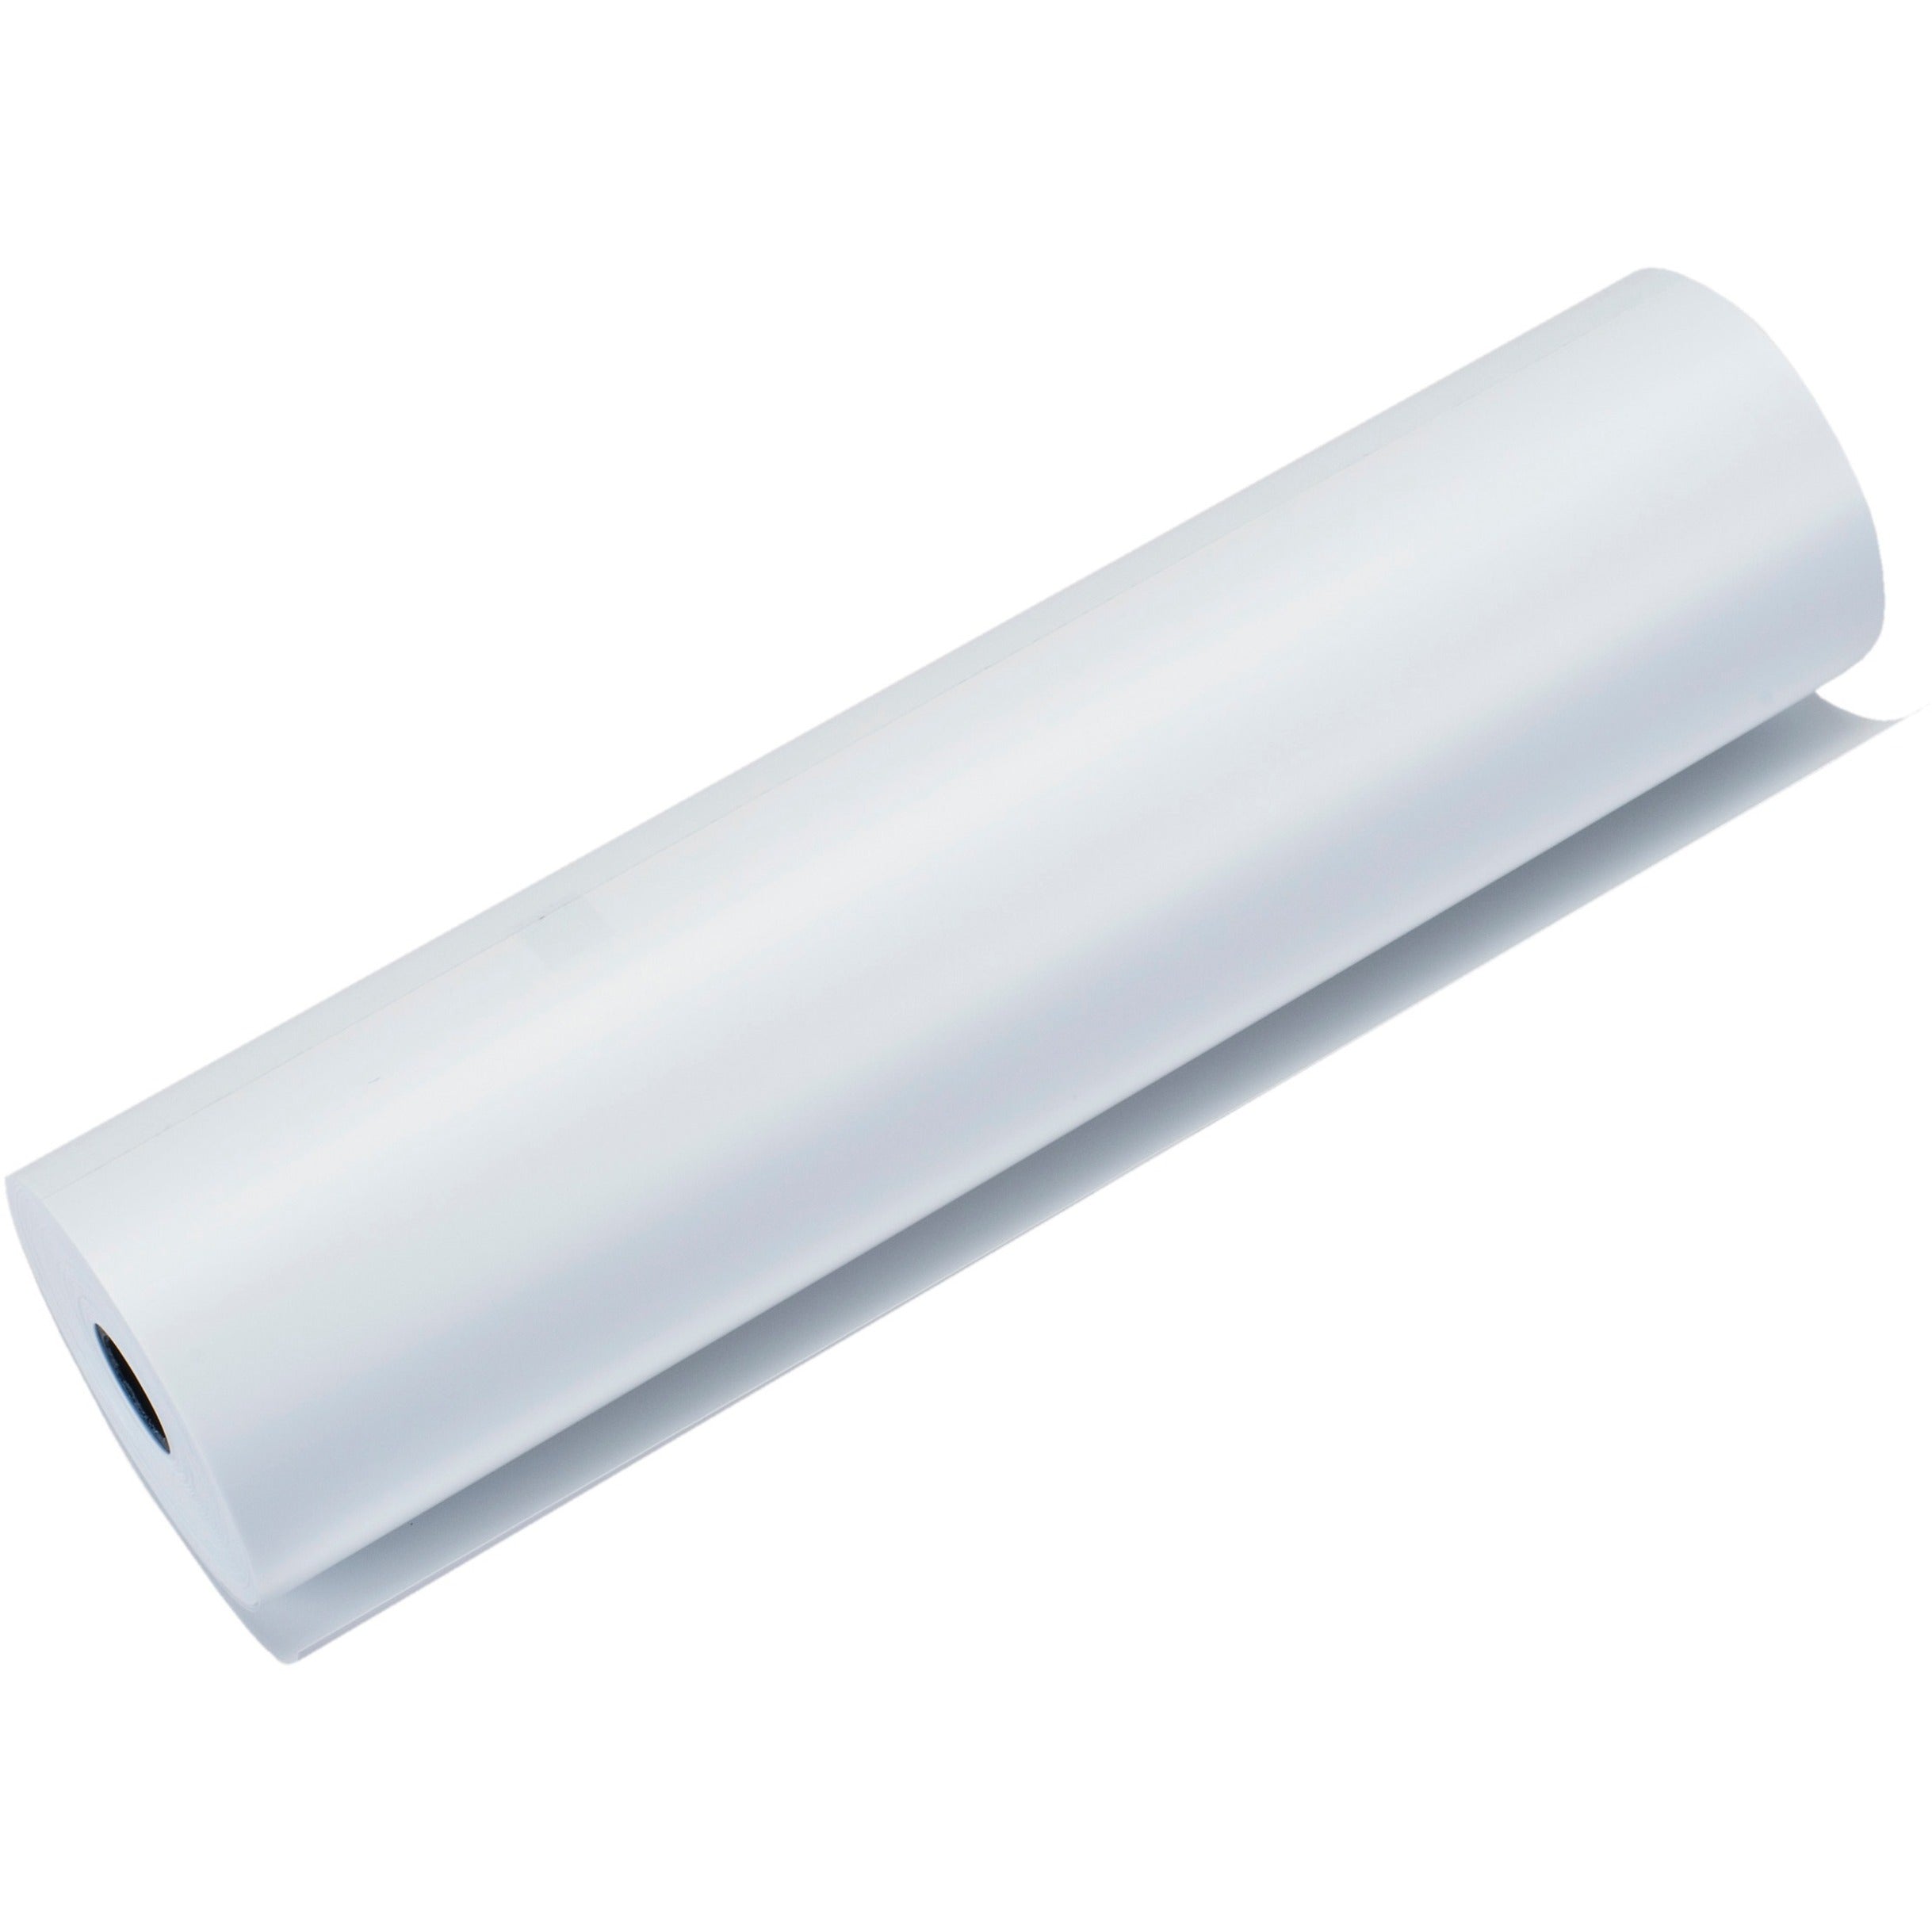 Brother LB3788 Thermal Paper, 6 / Roll - Printable Paper for High-Quality Printing